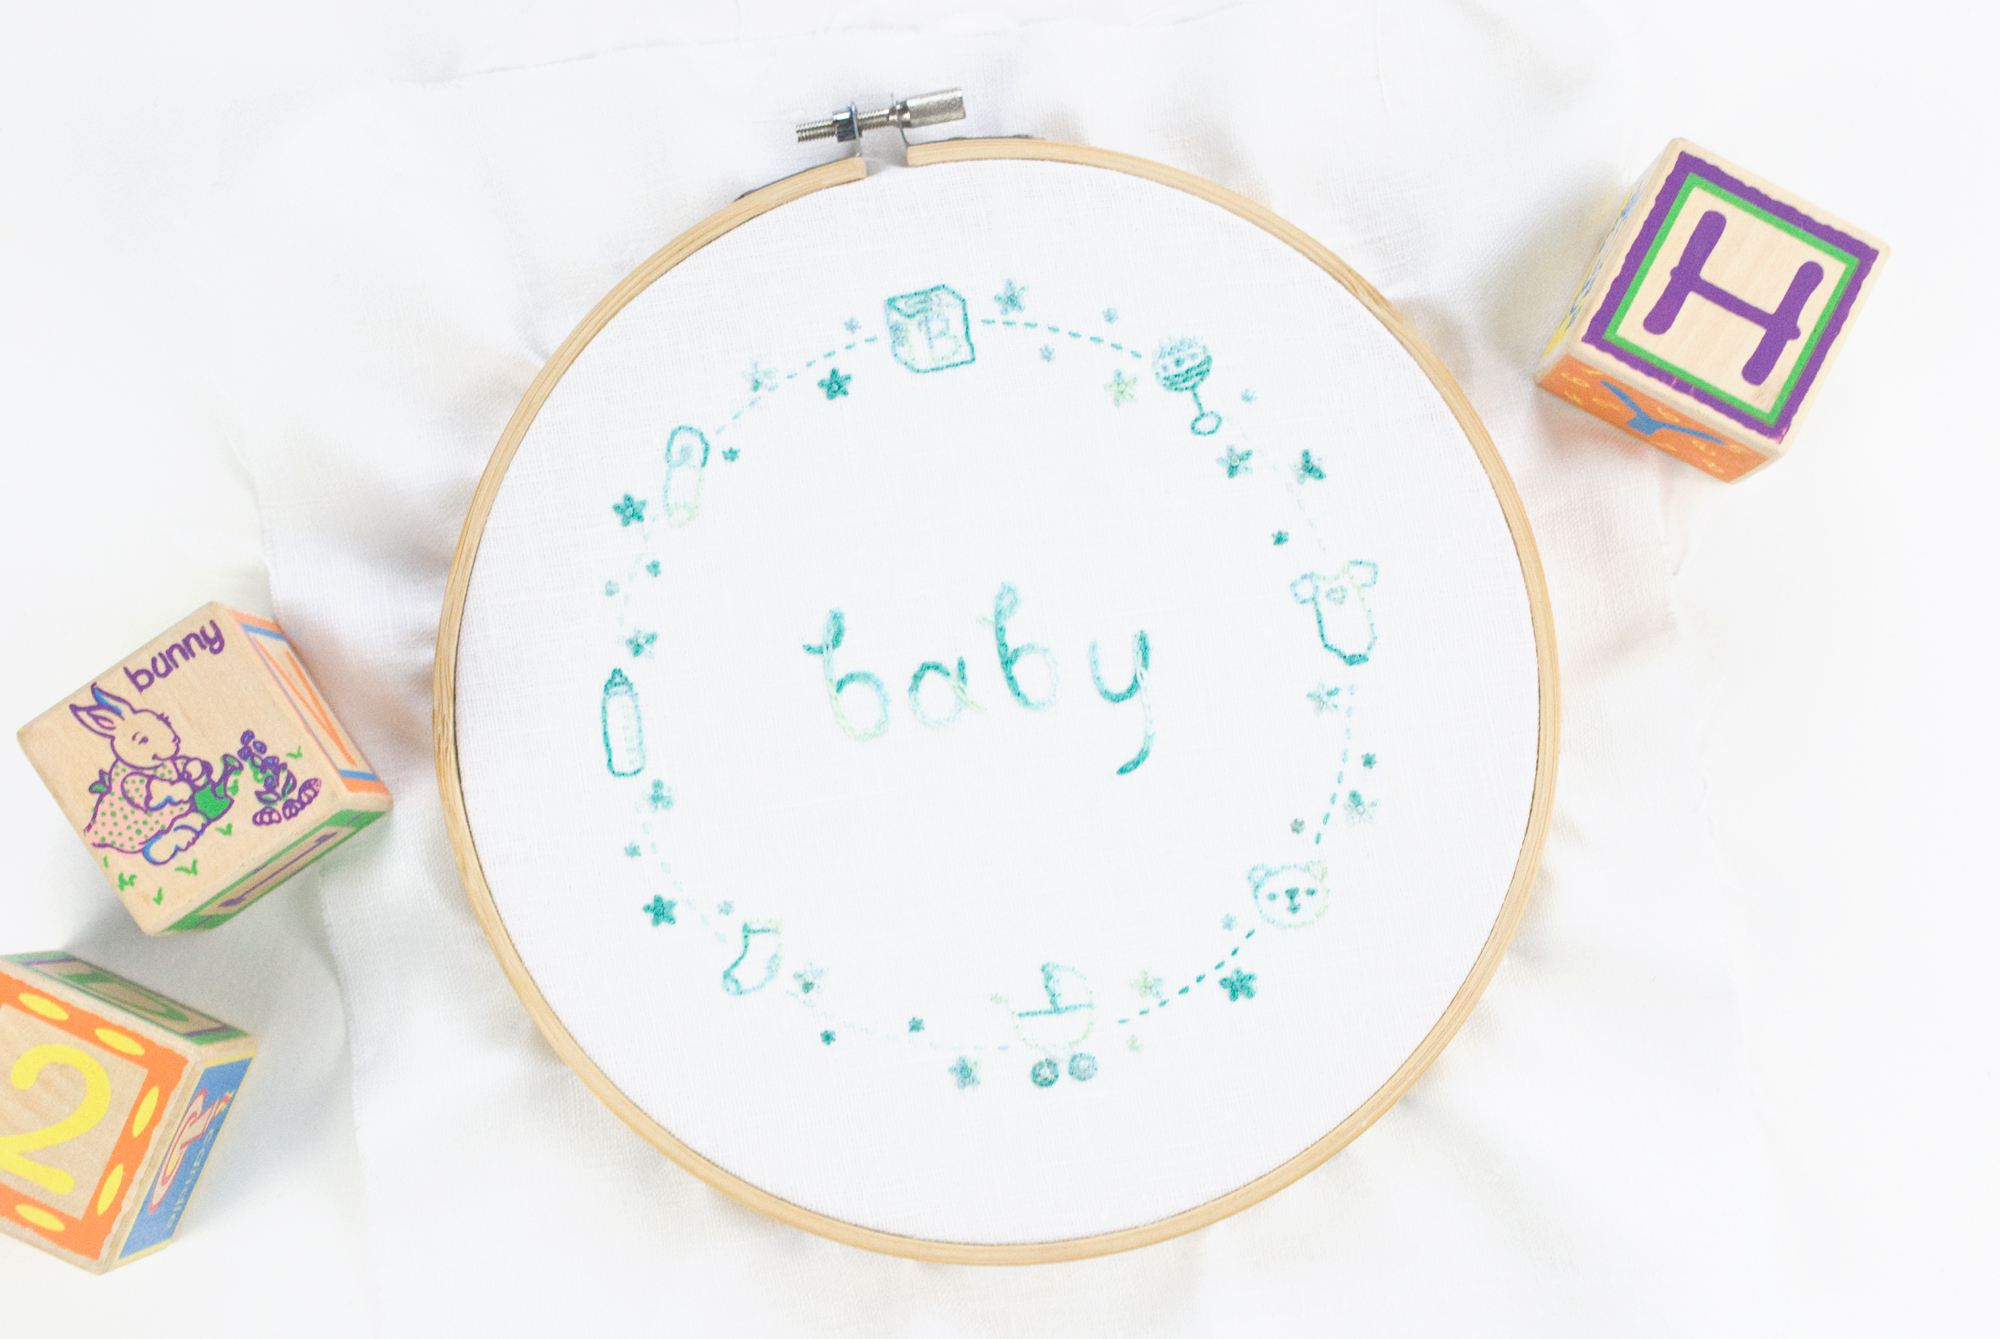 Free Hand Embroidery Patterns For Tea Towels Our Top 25 Free Embroidery Designs